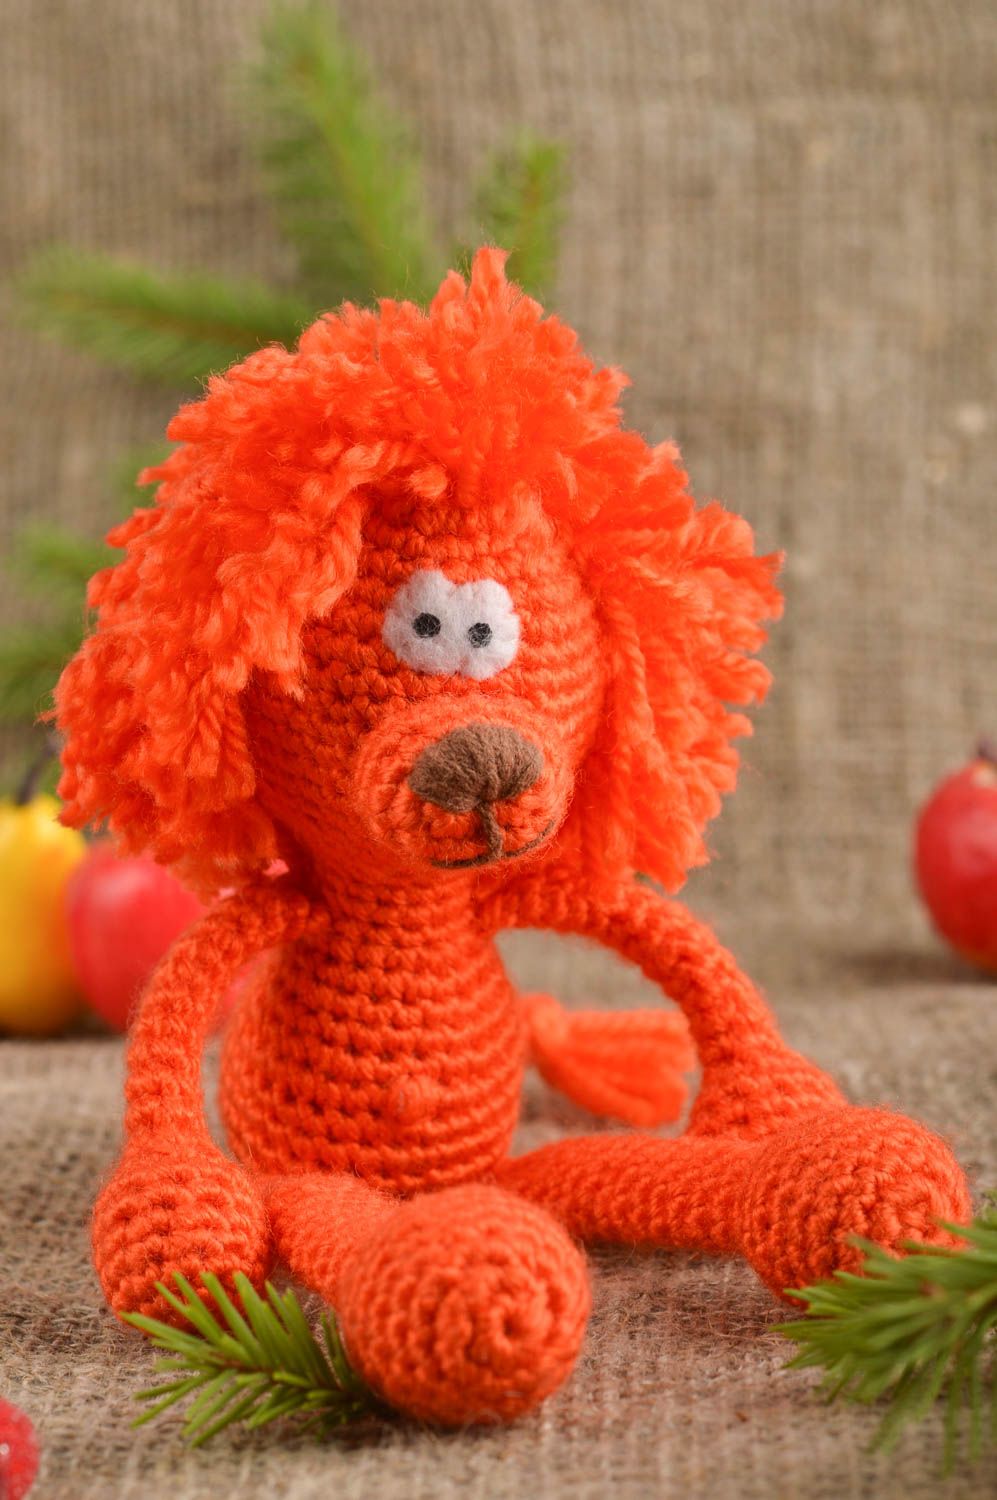 Handmade crocheted toy baby soft toy crocheted lion toy design crocheted toys   photo 1